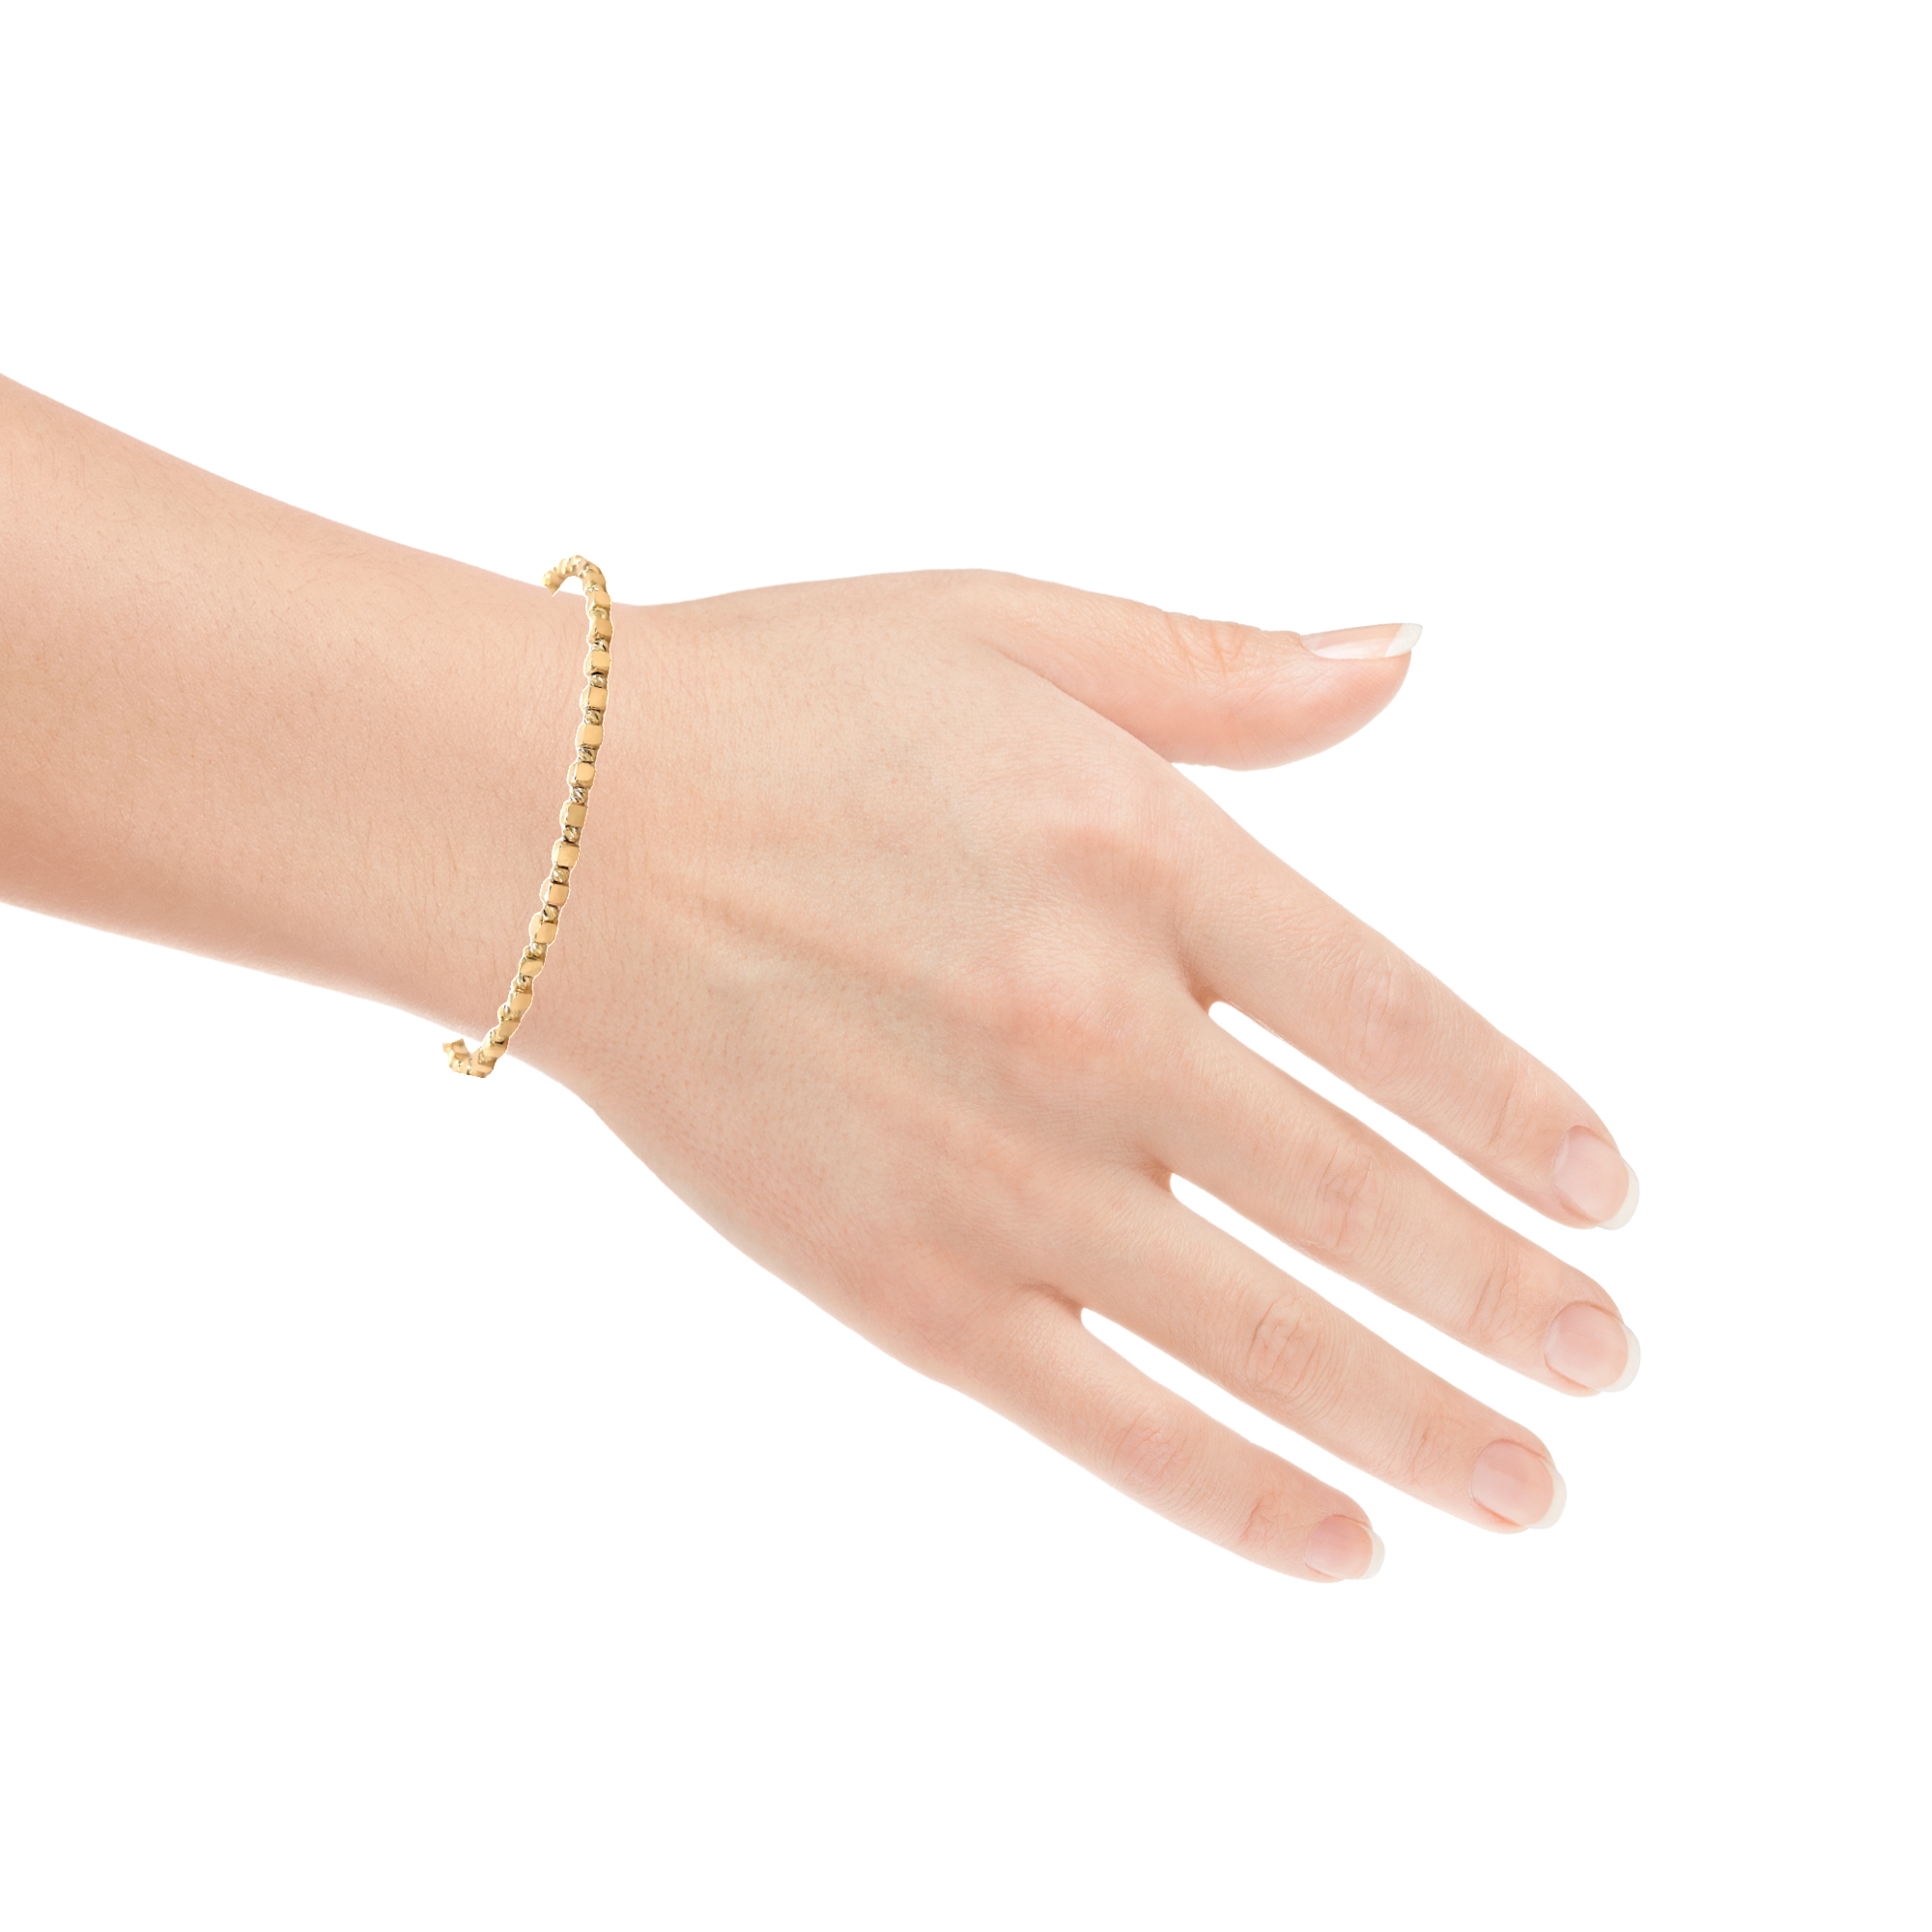 This 14k yellow gold bracelet is designed to be both stylish and secure. The 8 inch stackable bracelet features square beads and laser cut round beads for a truly unique look. The lobster clasp ensures it will stay securely in place.